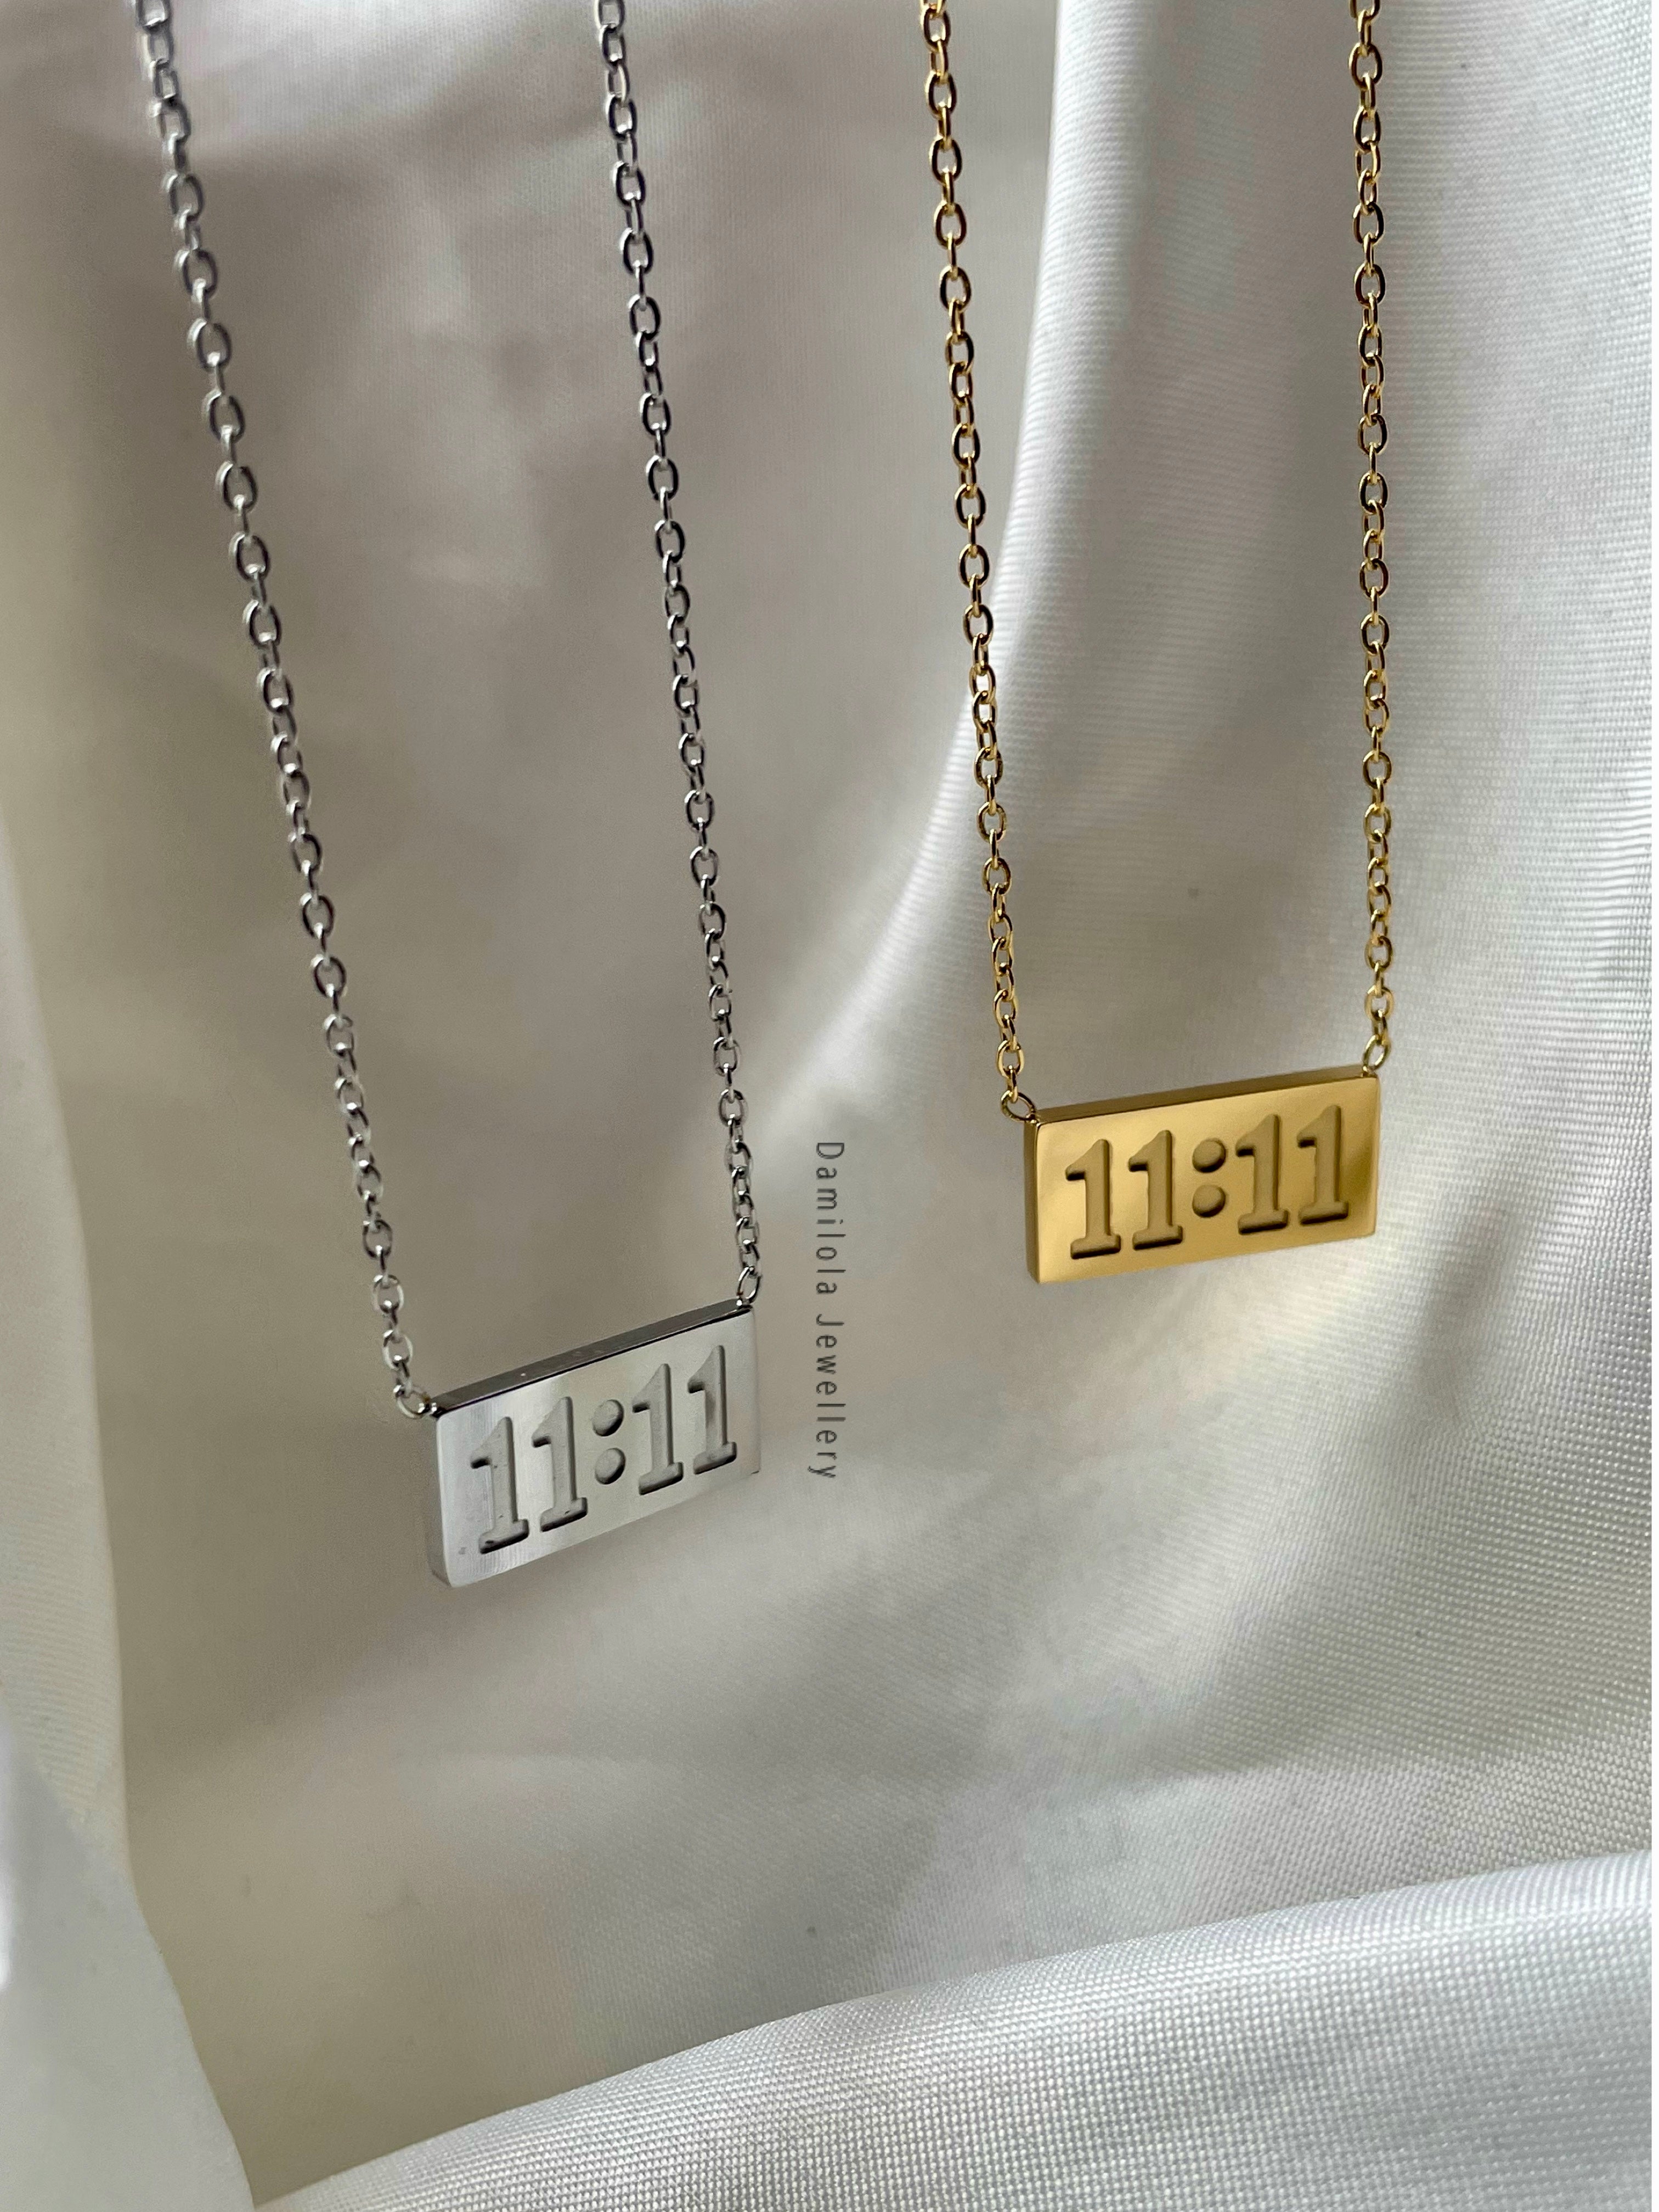 11:11 Necklace - Gold/Silver Angel Numbers Pendant 